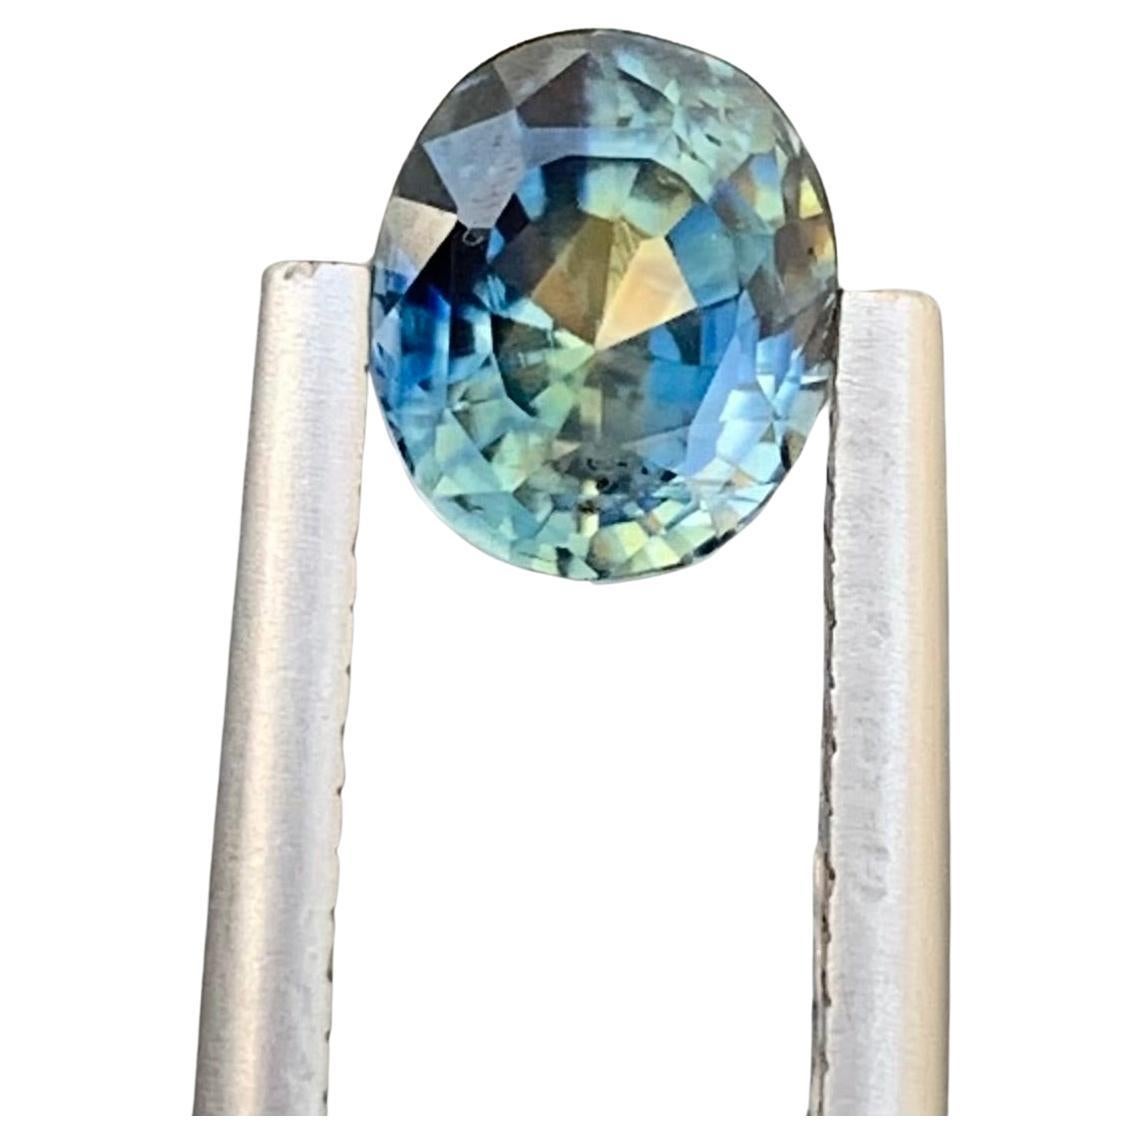 1.55 Carat Faceted Yellowish Blue Sapphire Oval Shape Gem From Madagascar Mine For Sale